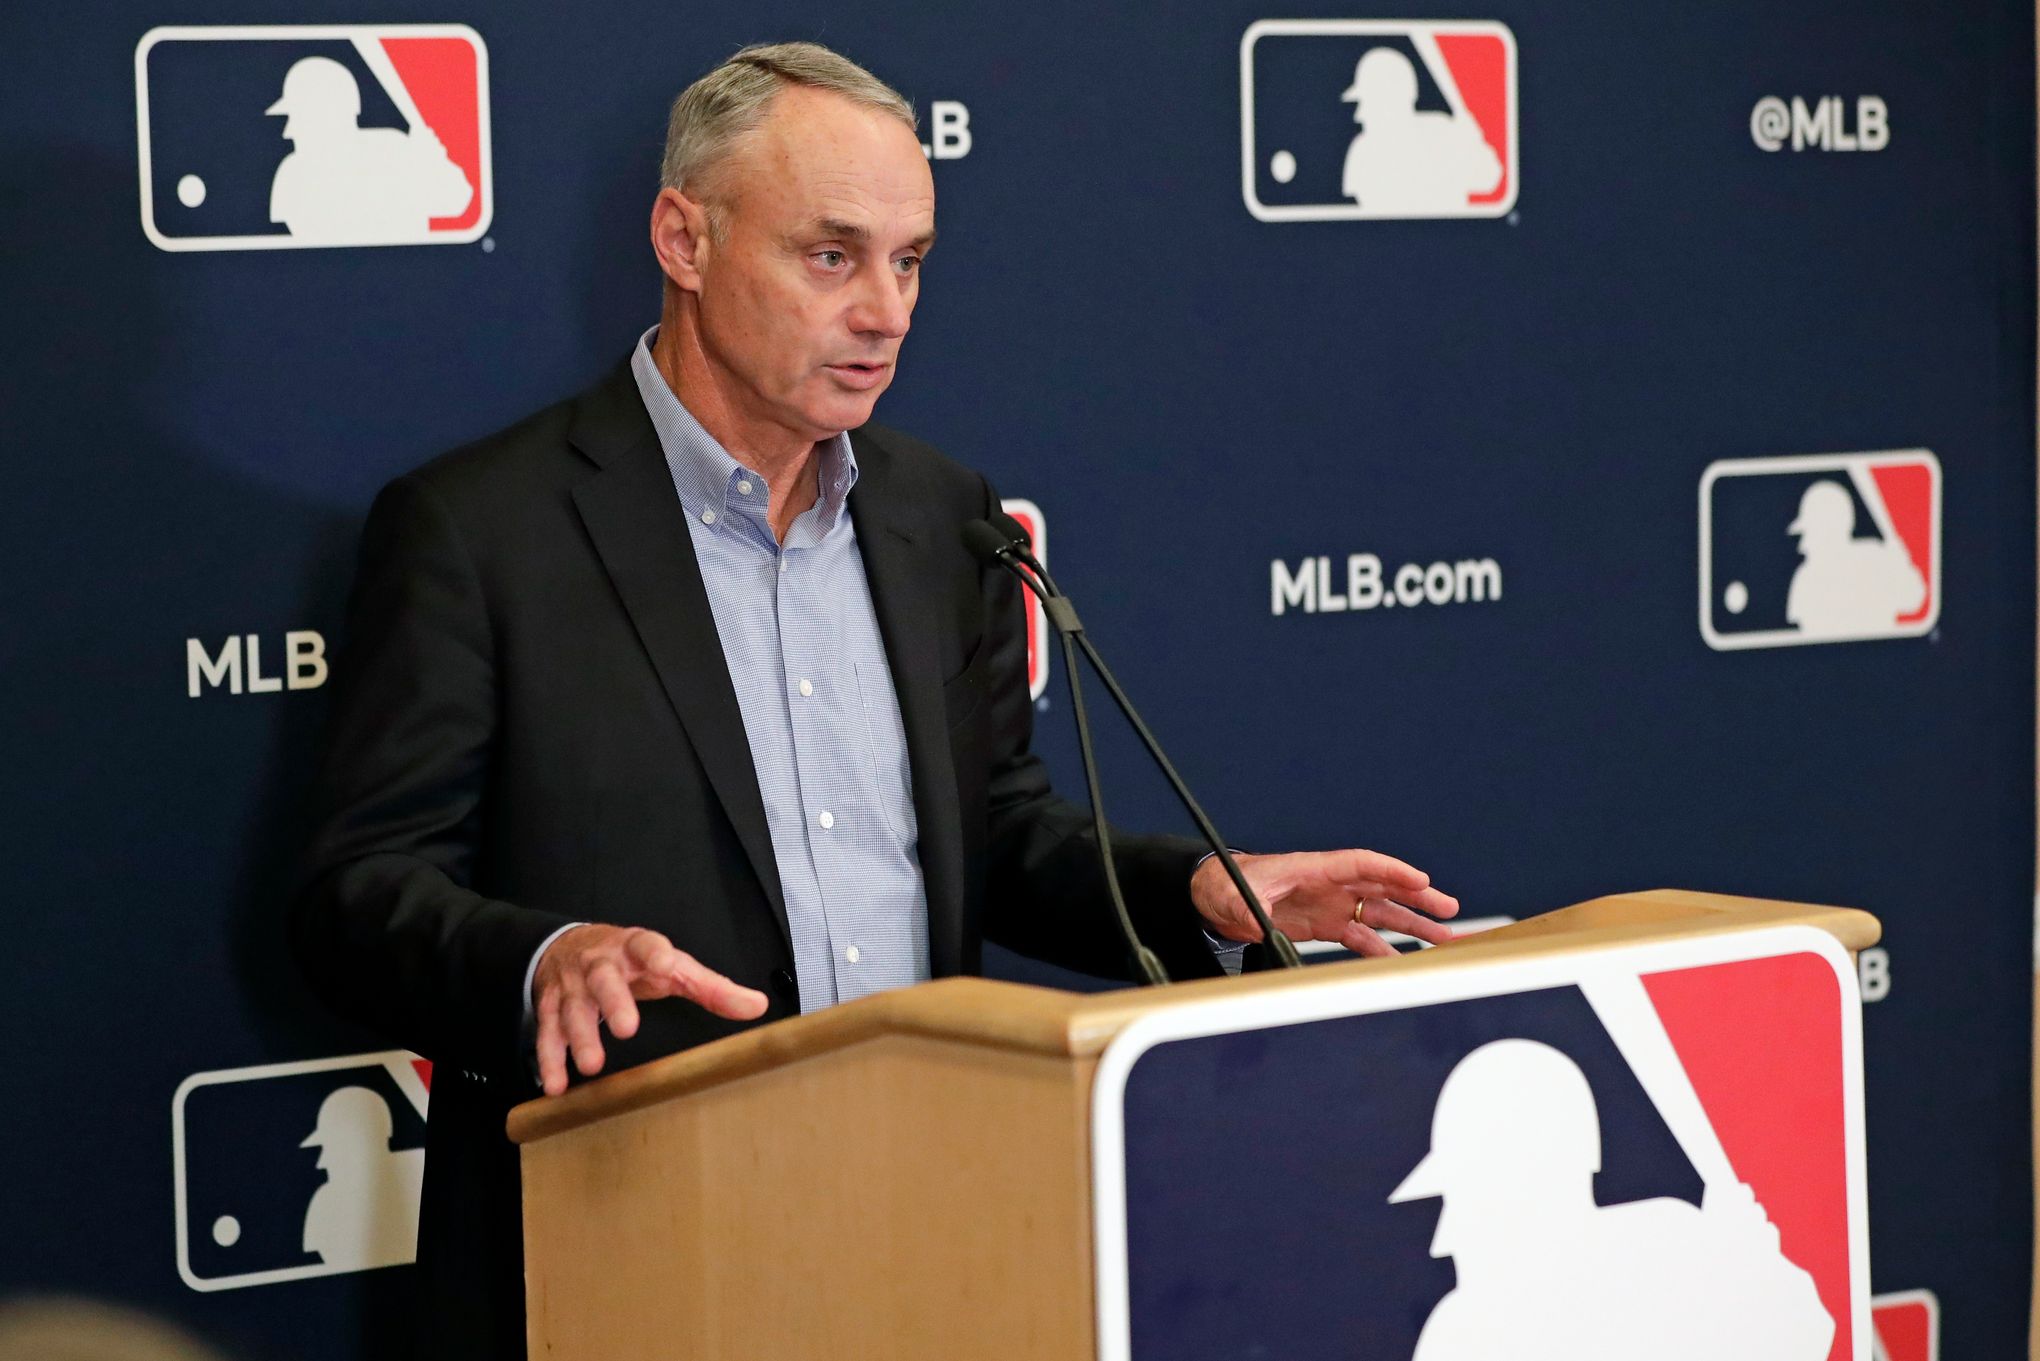 All the details on the 2020 MLB Season and the new rules governing the game